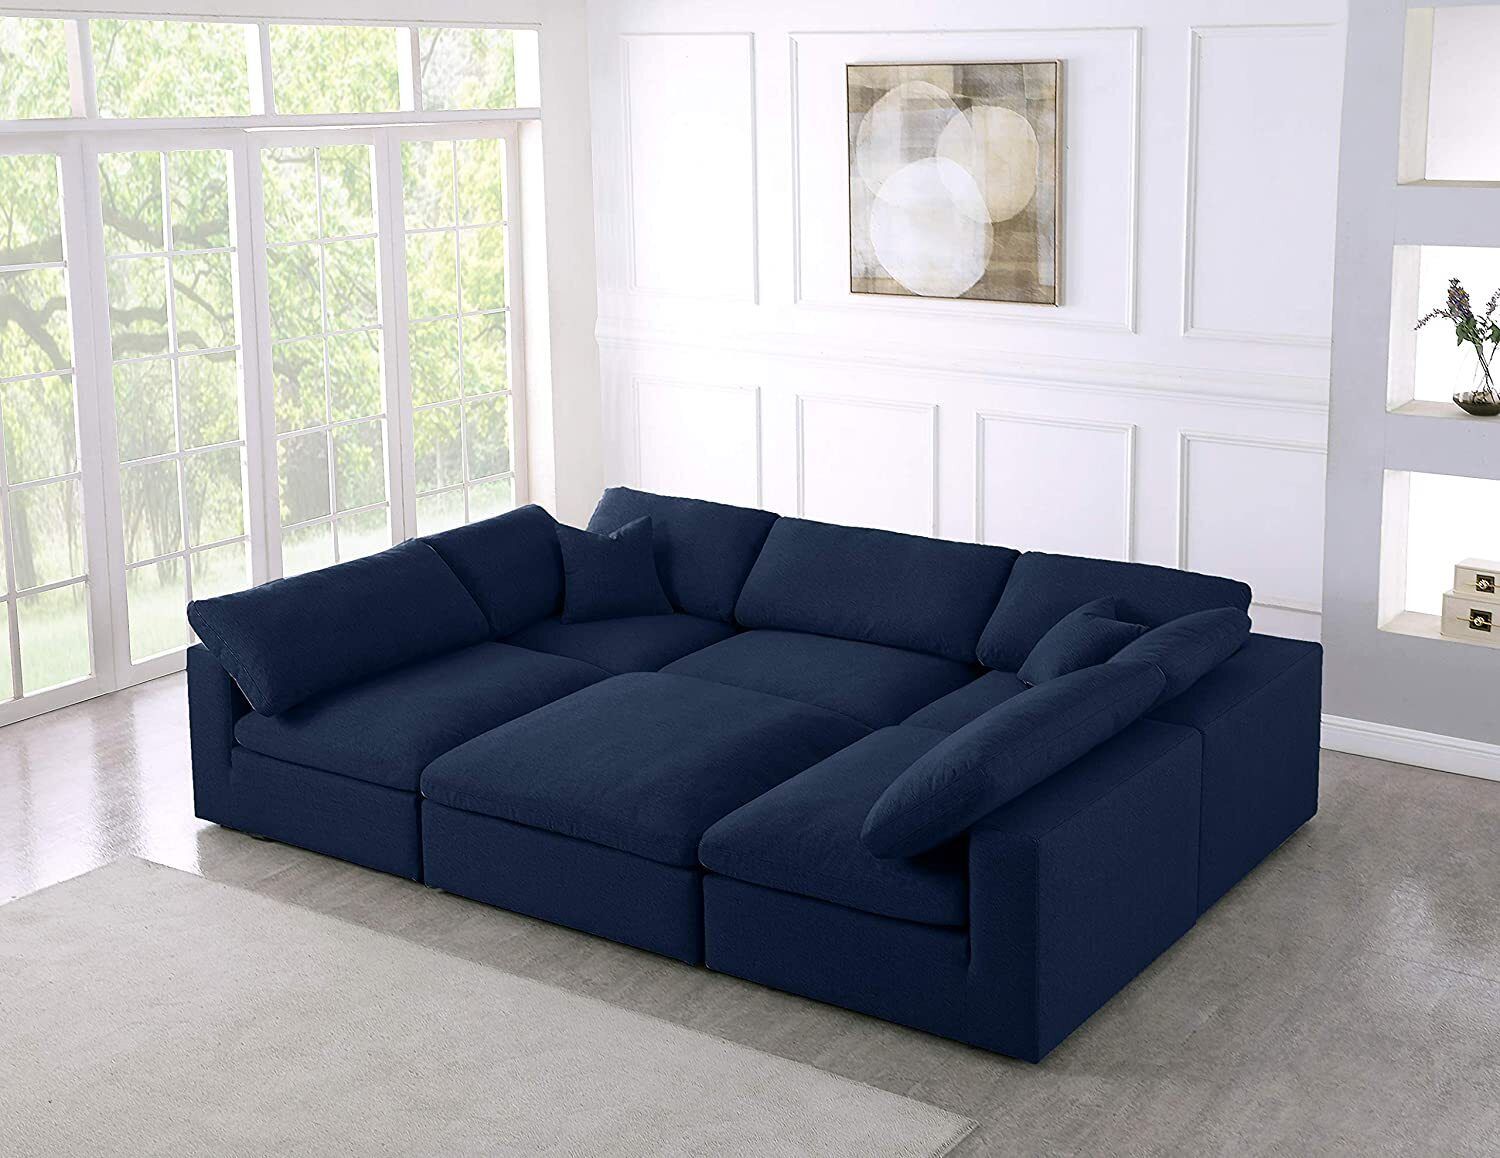 Modular Sleeper Sofas – Ideas On Foter In Oversized Sleeper Sofa Couch Beds (View 2 of 20)